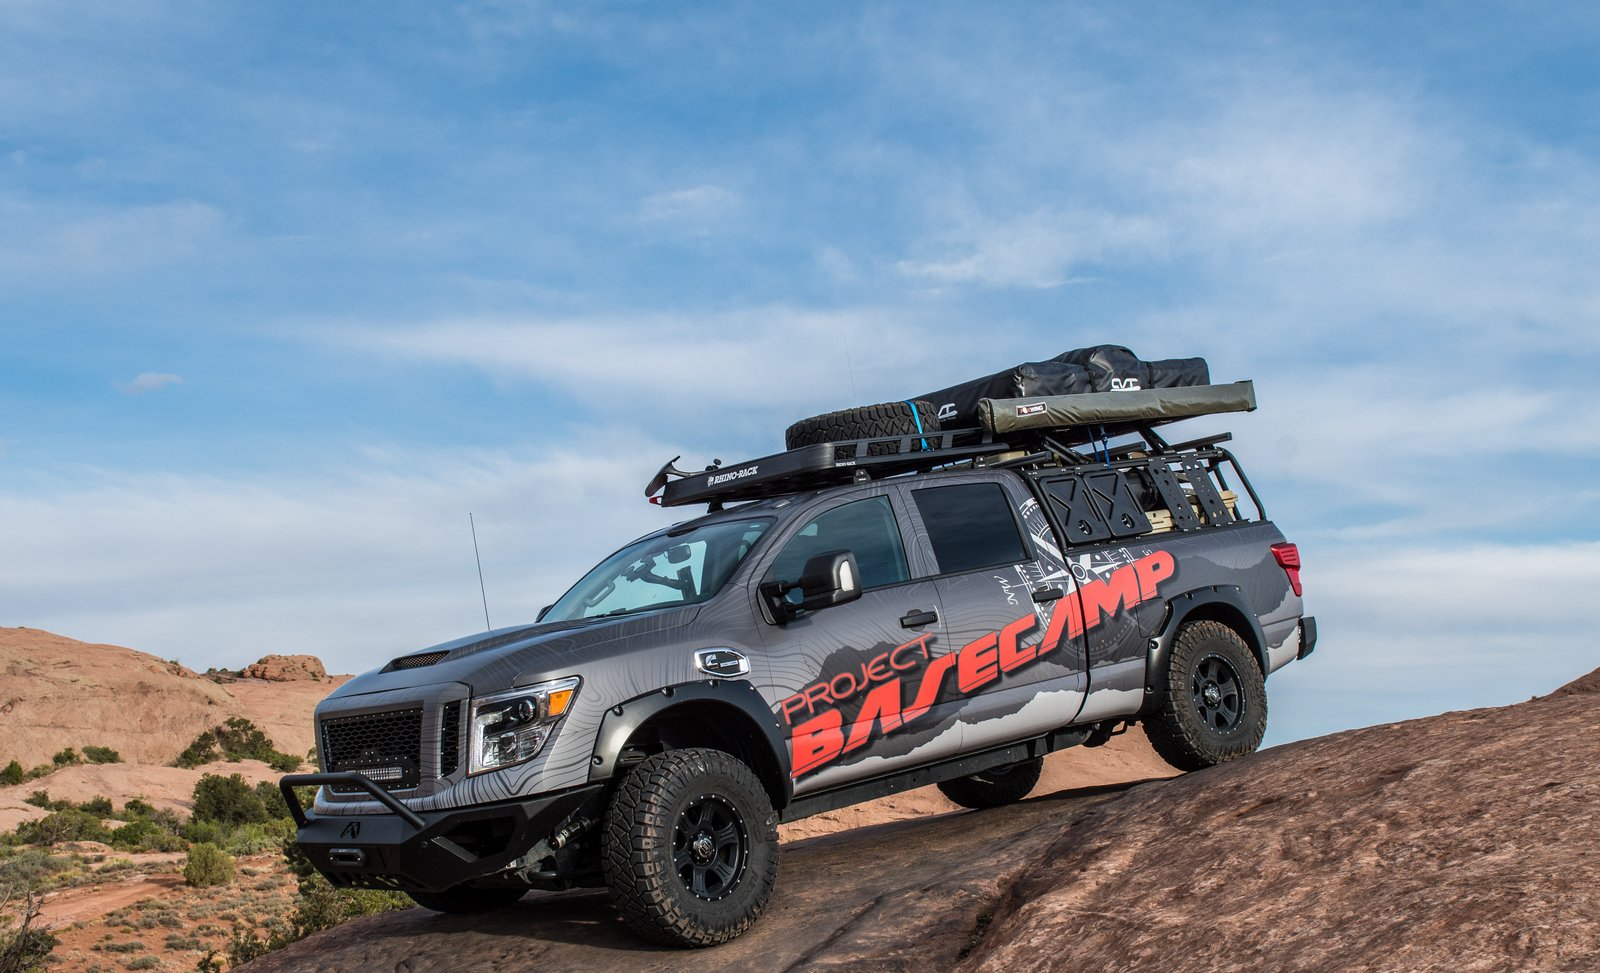 The Nissan TITAN XD PRO-4X Project Basecamp, designed for self-sustaining exploration of backcountry, is capable of taking on any climate or terrain in its path. It’s built on the foundation of a rugged Nissan TITAN XD PRO-4X, anchored by a powerful Cummins® 5.0L V8 Turbo Diesel rated at 310 horsepower and a hefty 555 lb-ft of torque. Key modifications include 3-inch lift kit, bed cage, stargazer tent, light bar and 35-inch tires.